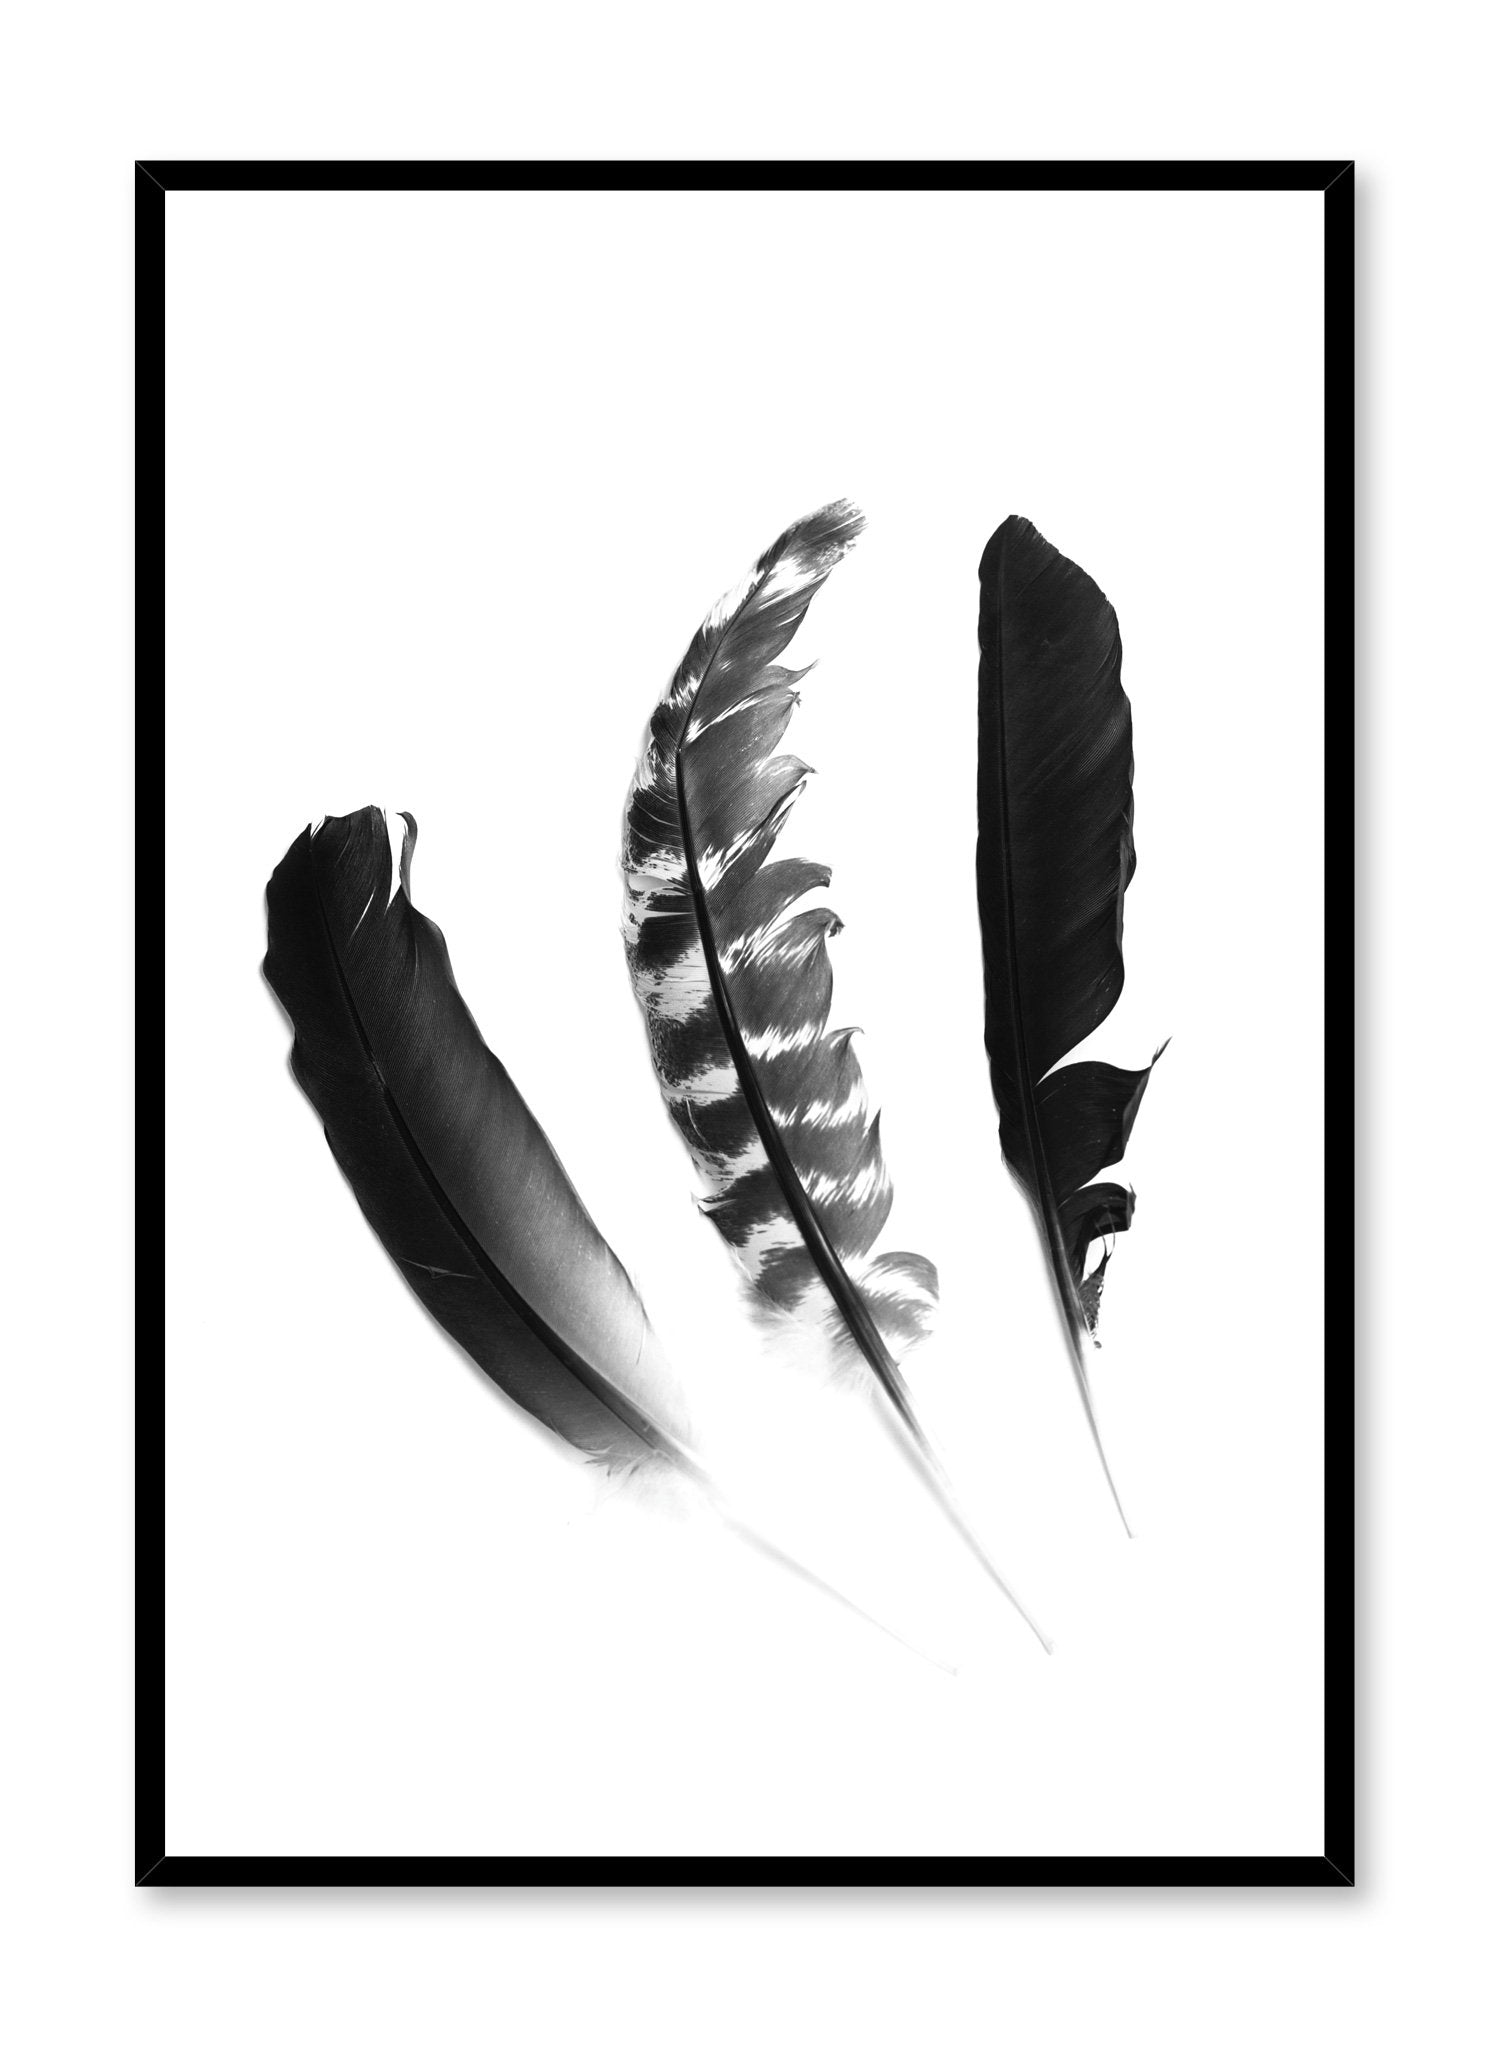 Minimalist black and white photography poster by Opposite Wall featuring a Chic Trio of feathers